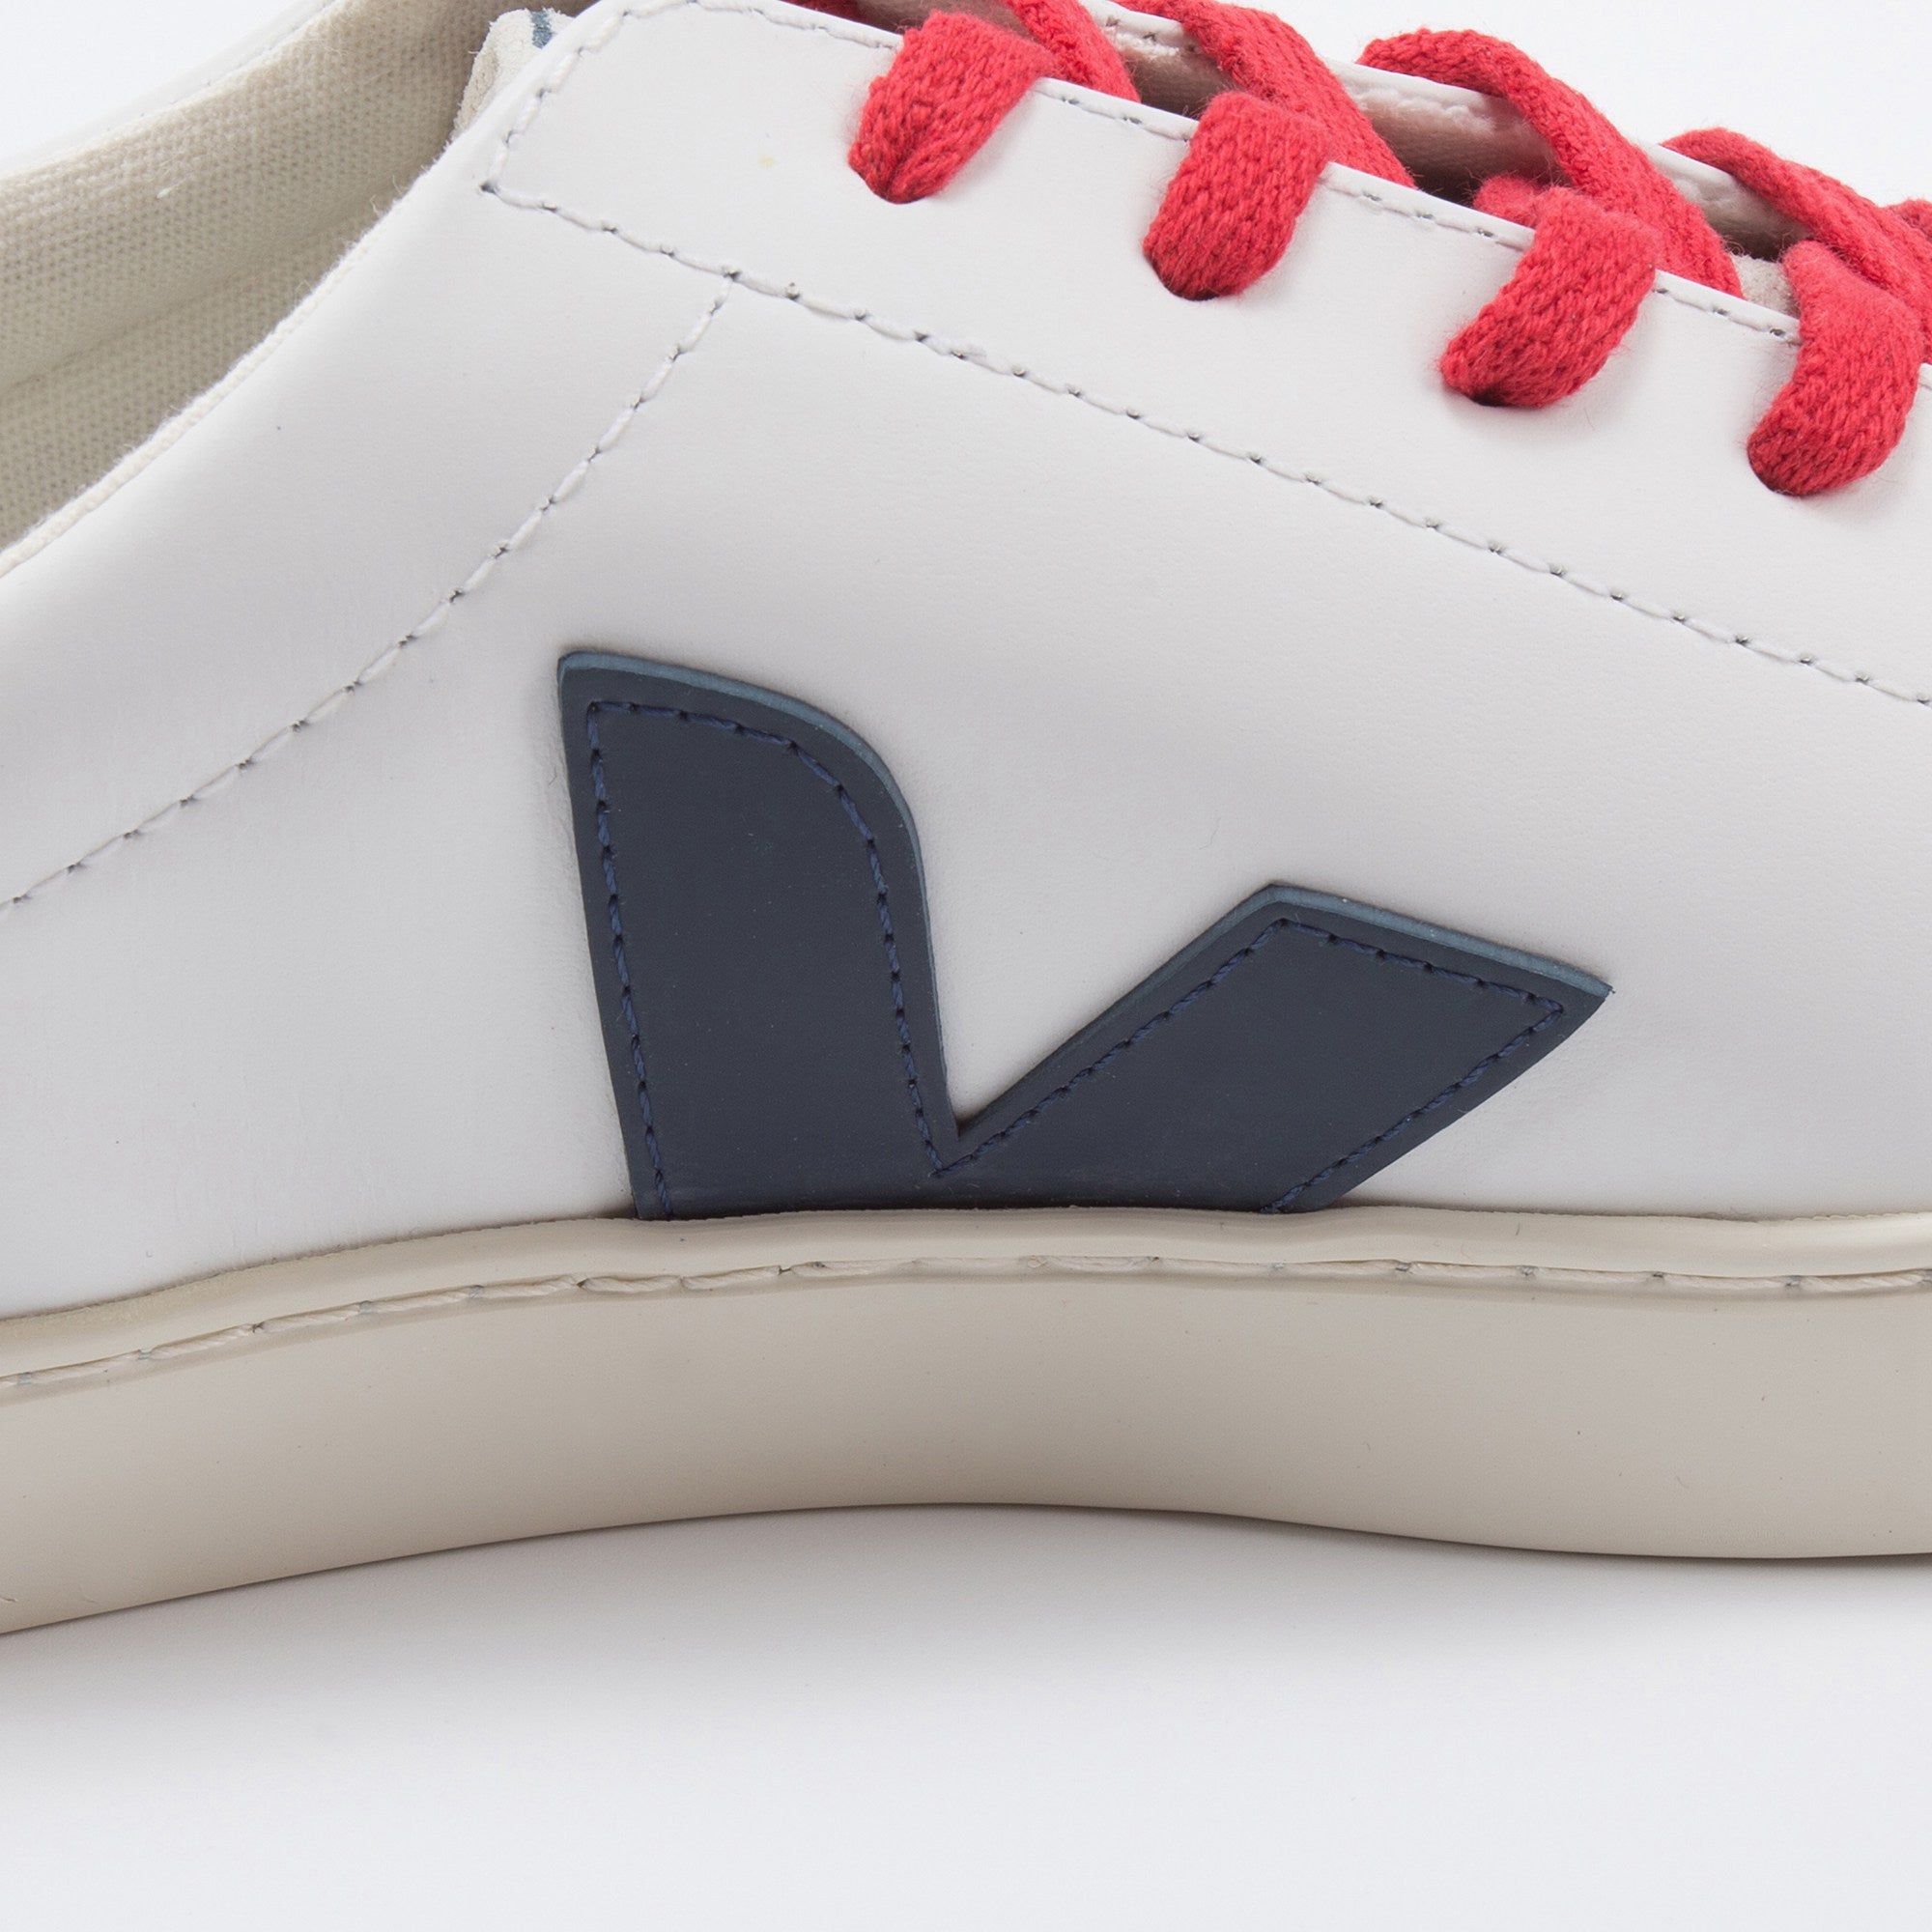 Girls White Leather Velcro With Blue "V" Shoes